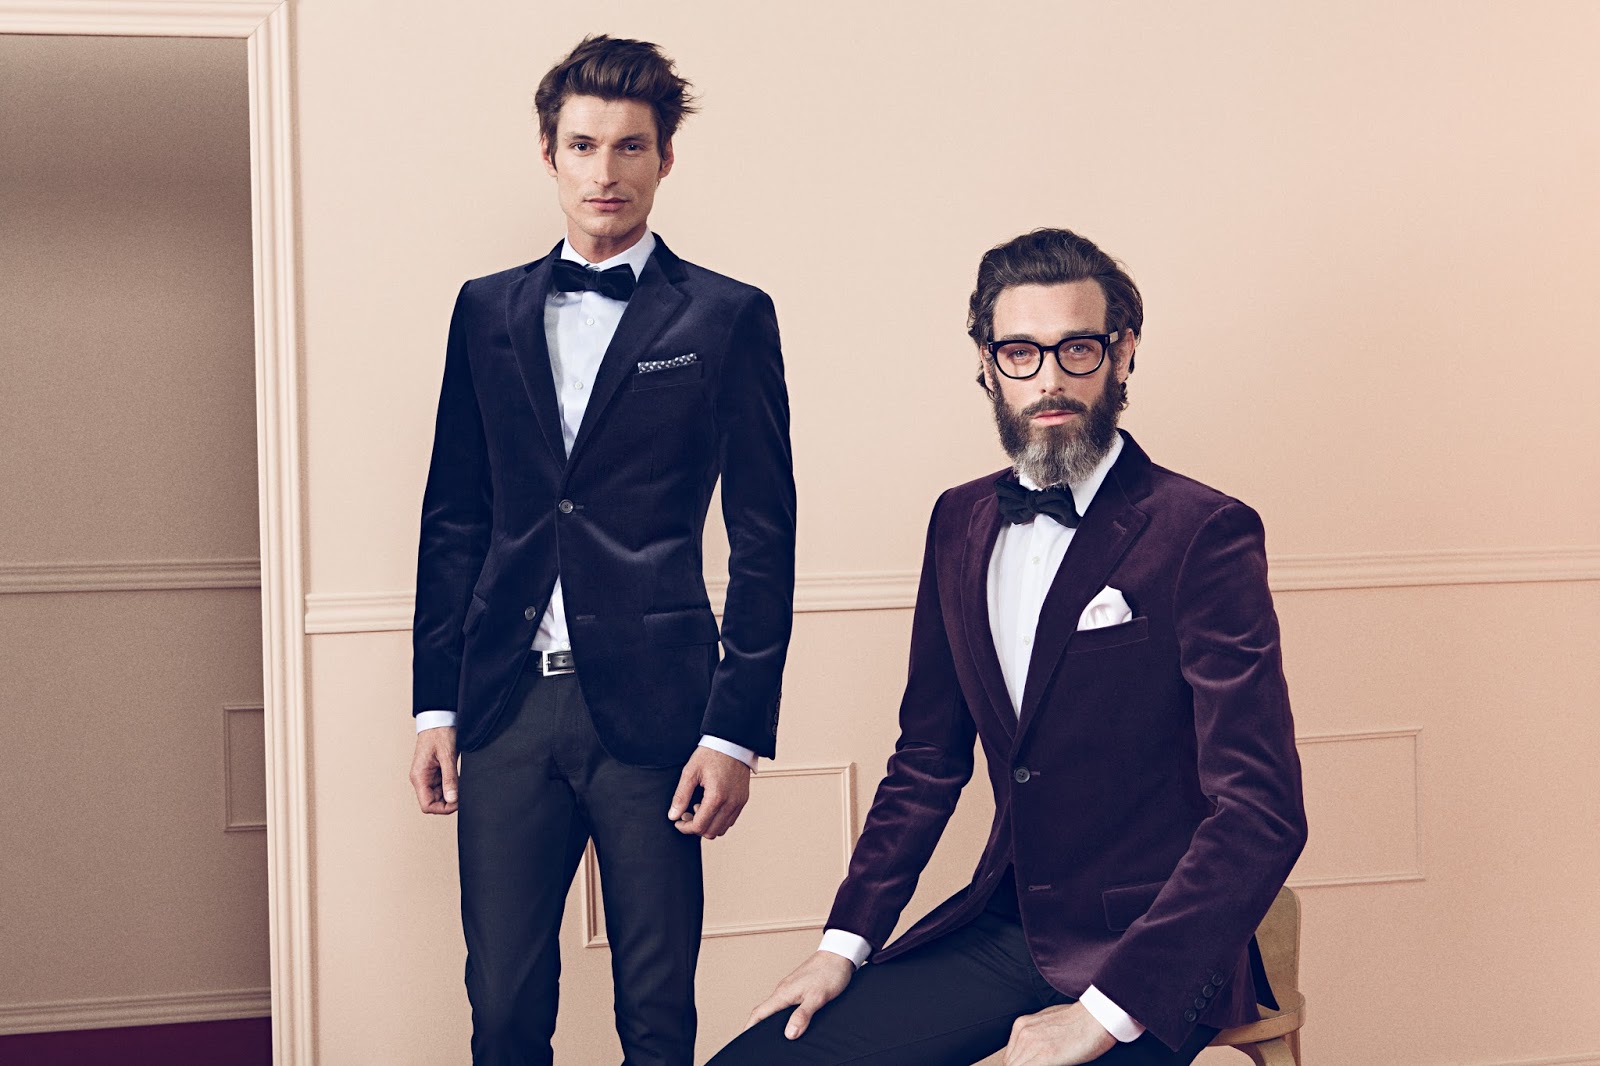 Richard Biedul + Pablo Pietro are Dressed to Impress for Mansolutely